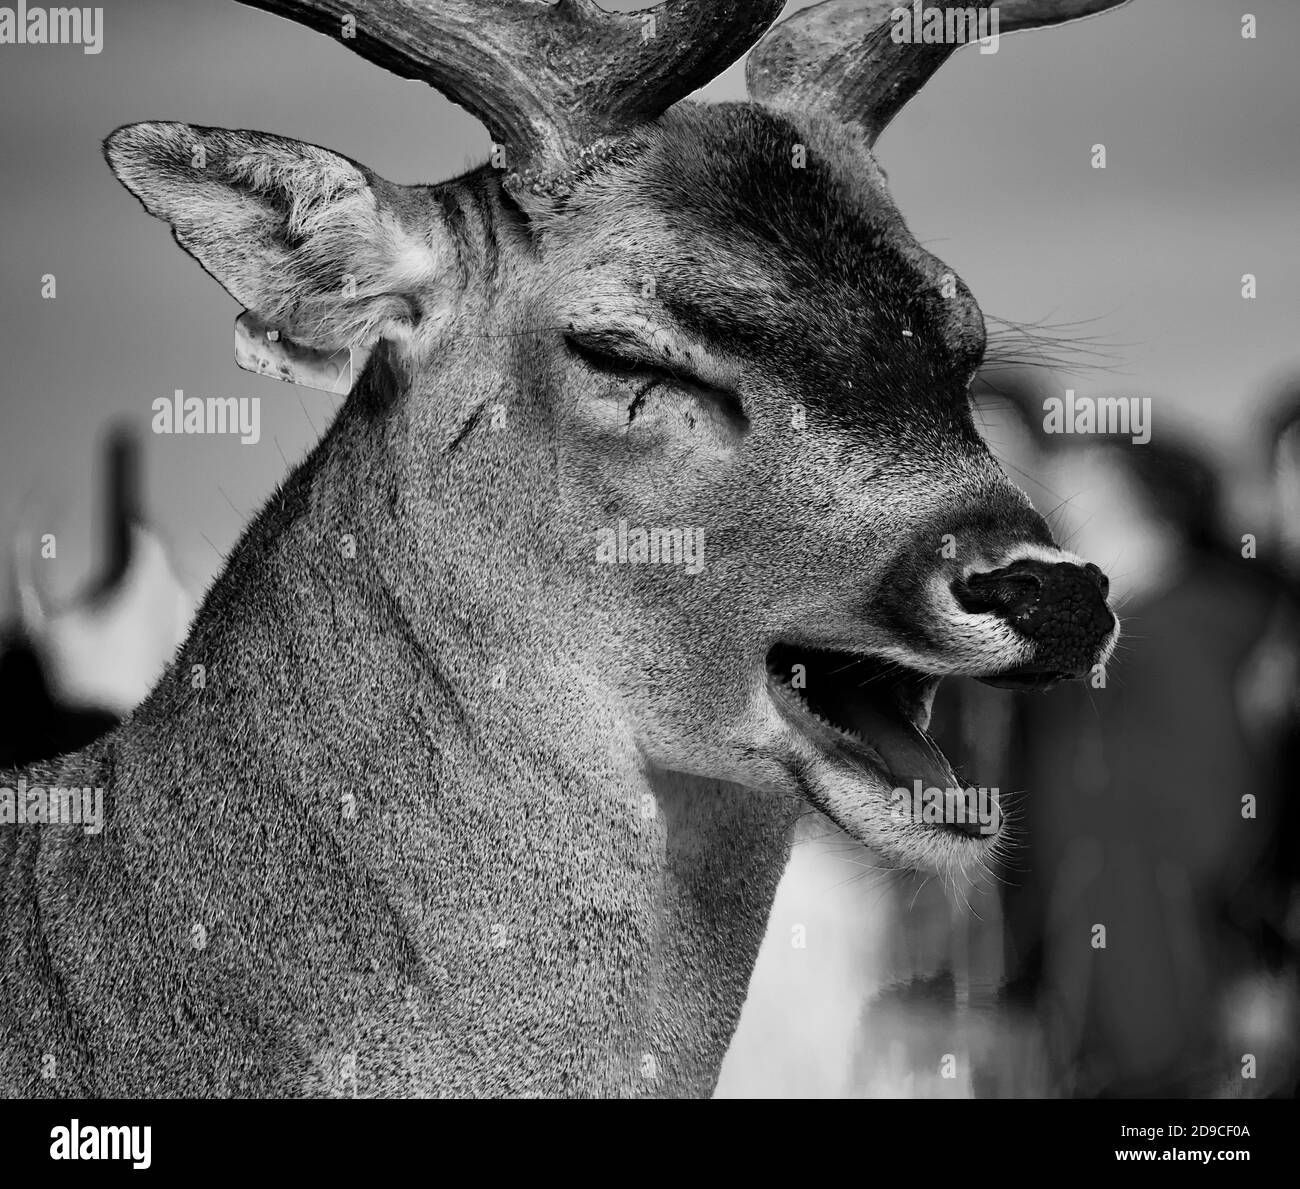 Portrait of deer taken while it appears to be laughing, Phoenix Park, Dublin, Sep 2019 Stock Photo